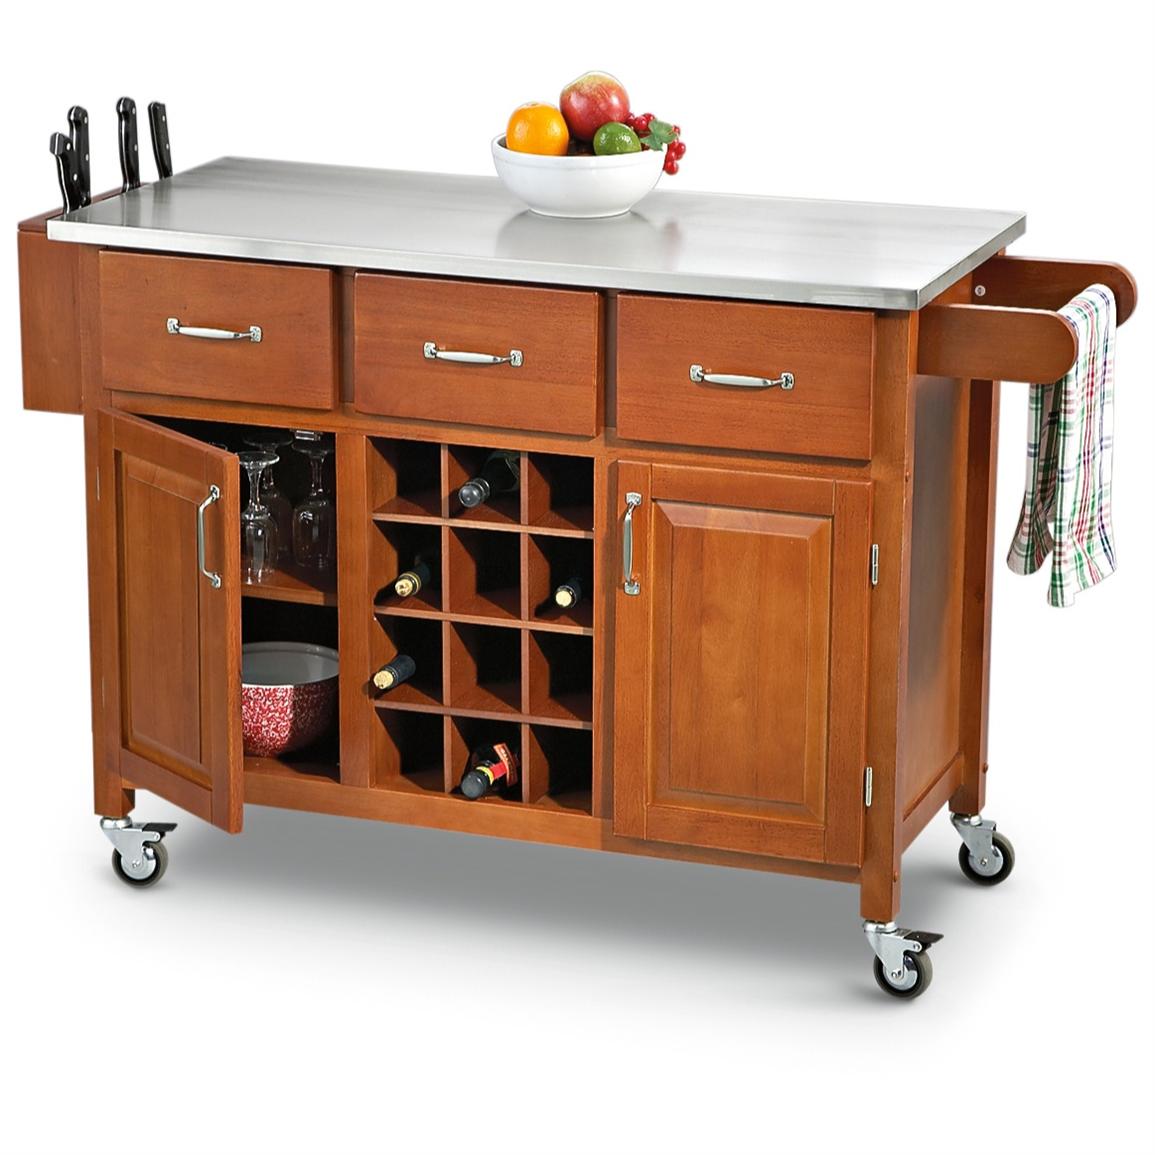 Stainless Steel - top Rolling Kitchen Cart - 203777, Kitchen & Dining Stainless Steel Kitchen Rolling Cart